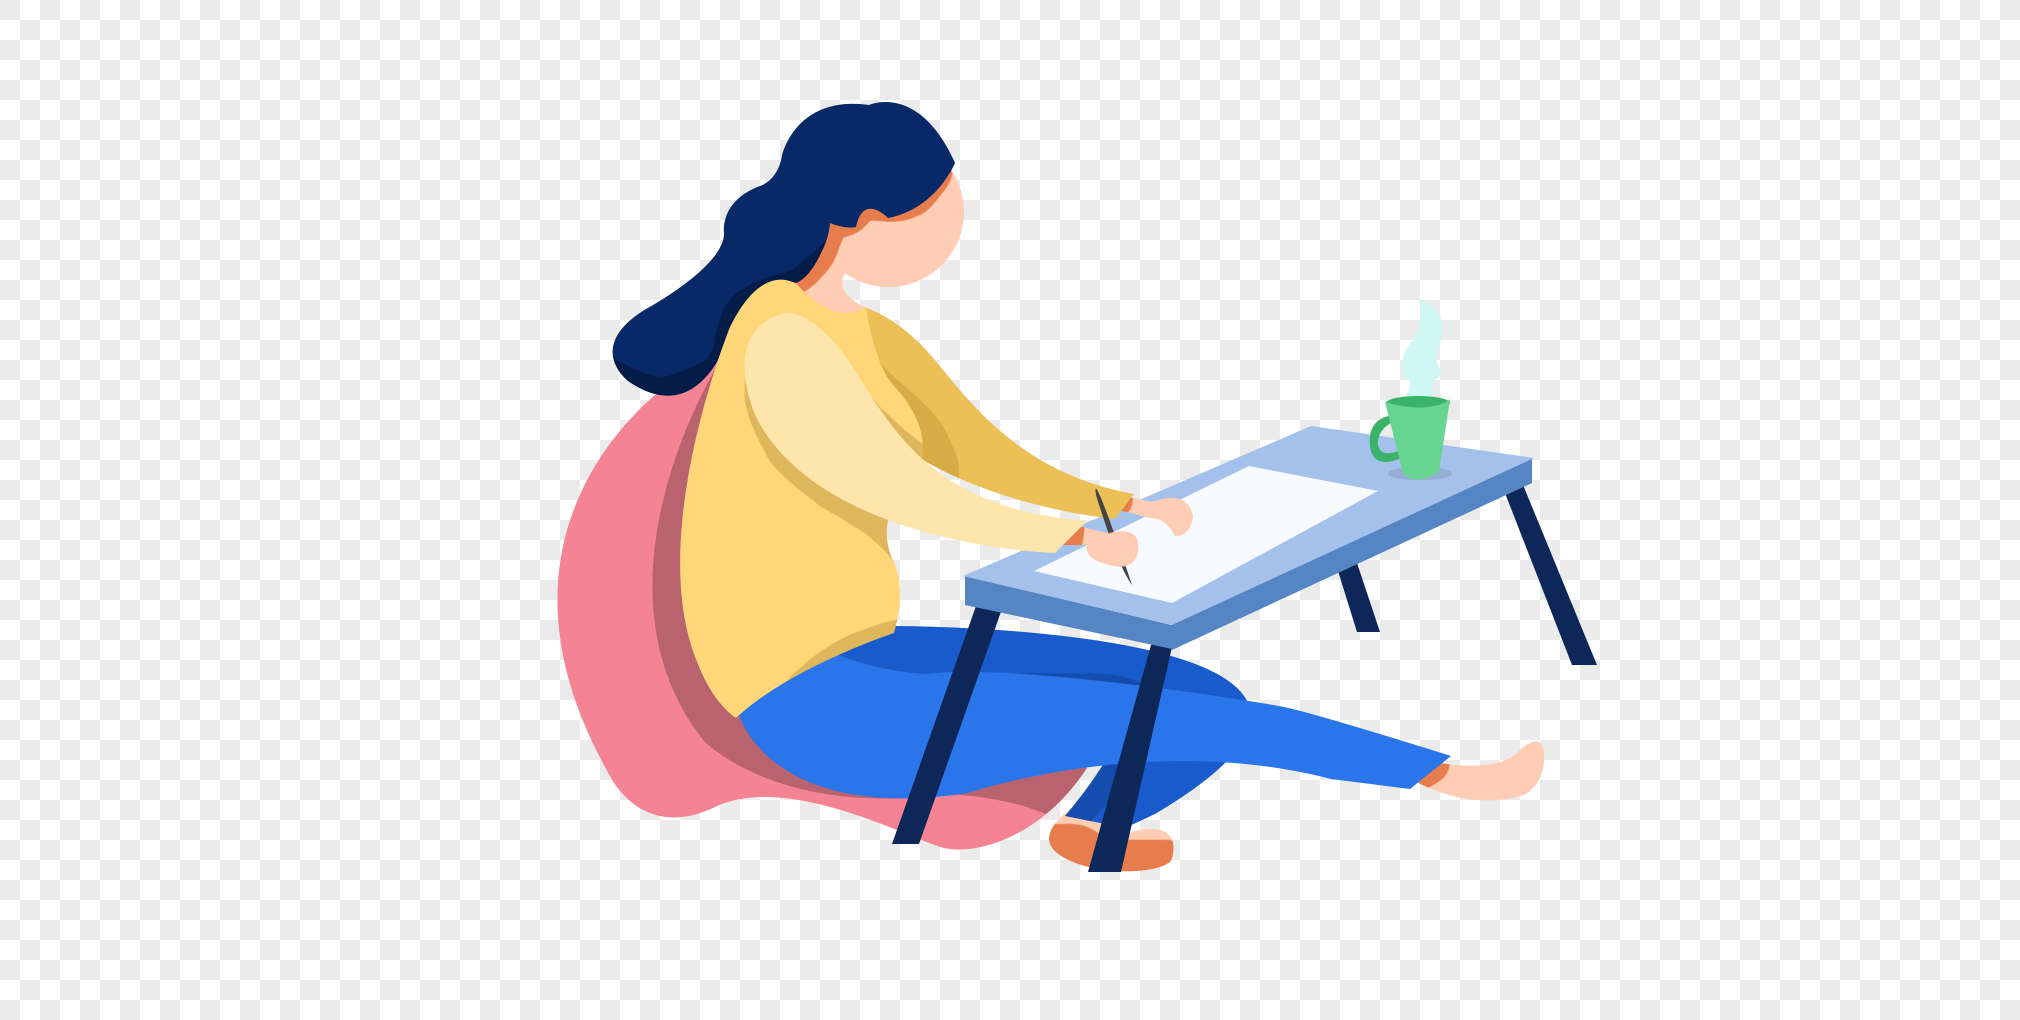 Home writing writer, characters, writing, writing diary png hd transparent image